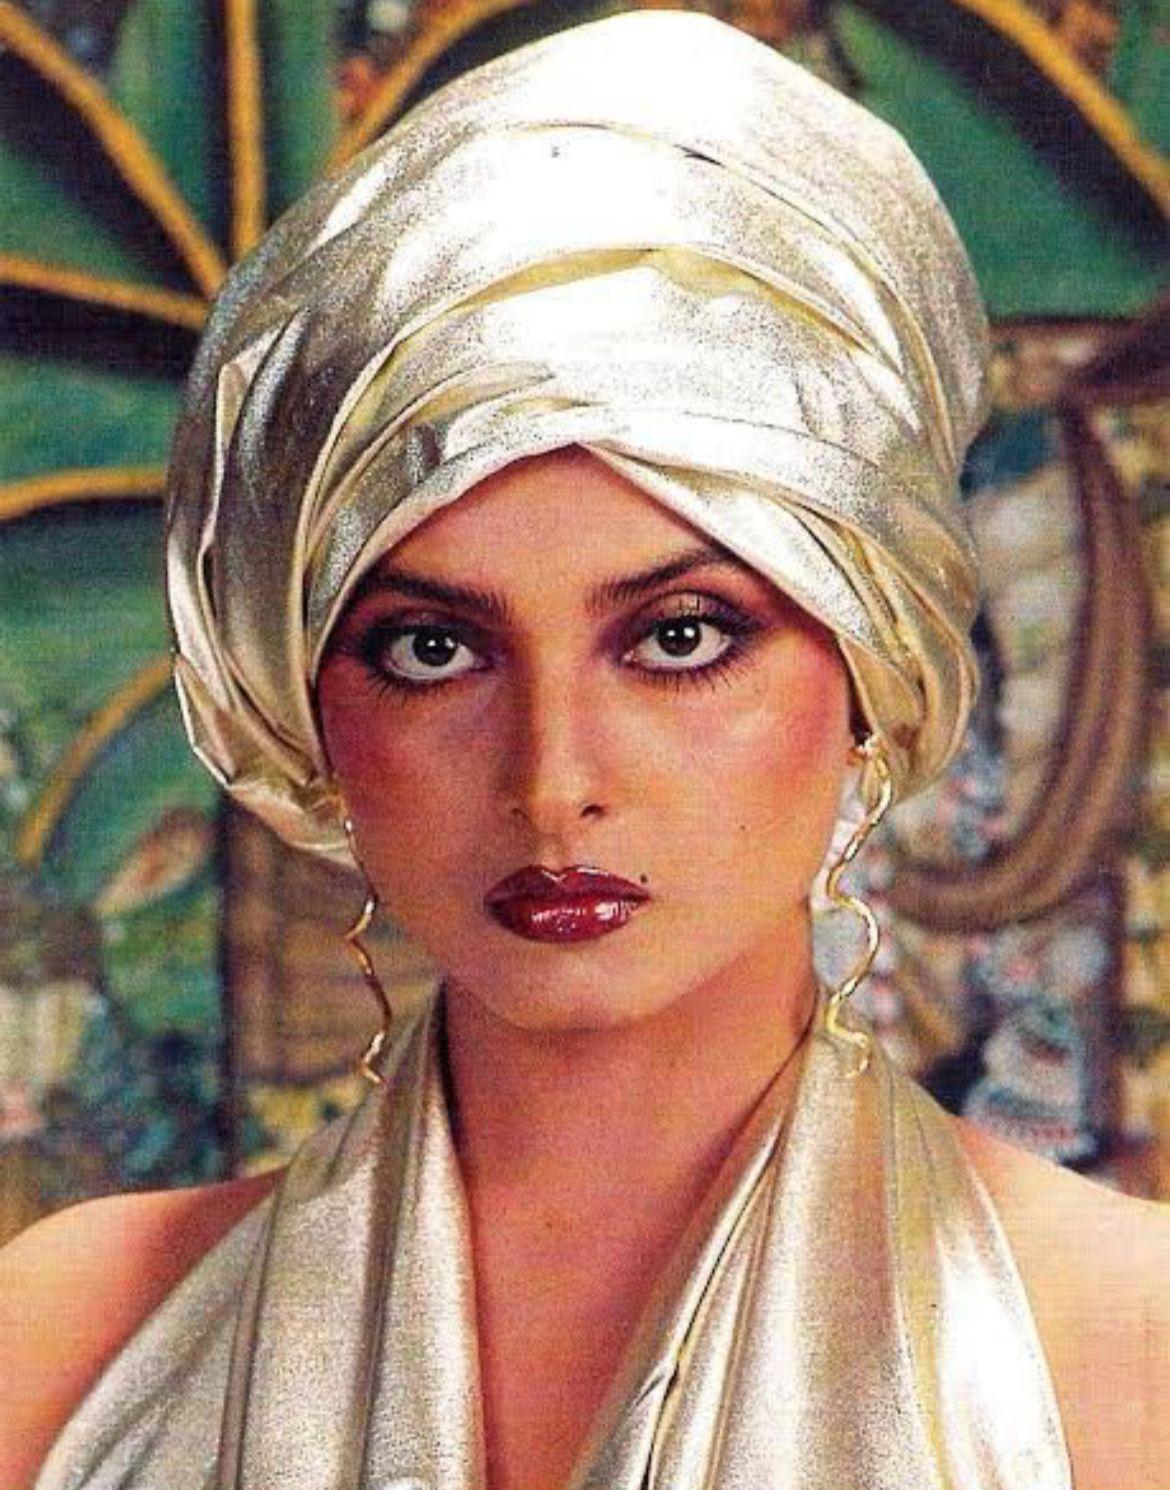 The gypsy head scarf is an unforgettable element of Rekha's iconic style. Sushant Divgikar pays tribute to this historic look, ensuring it receives its deserved recognition.